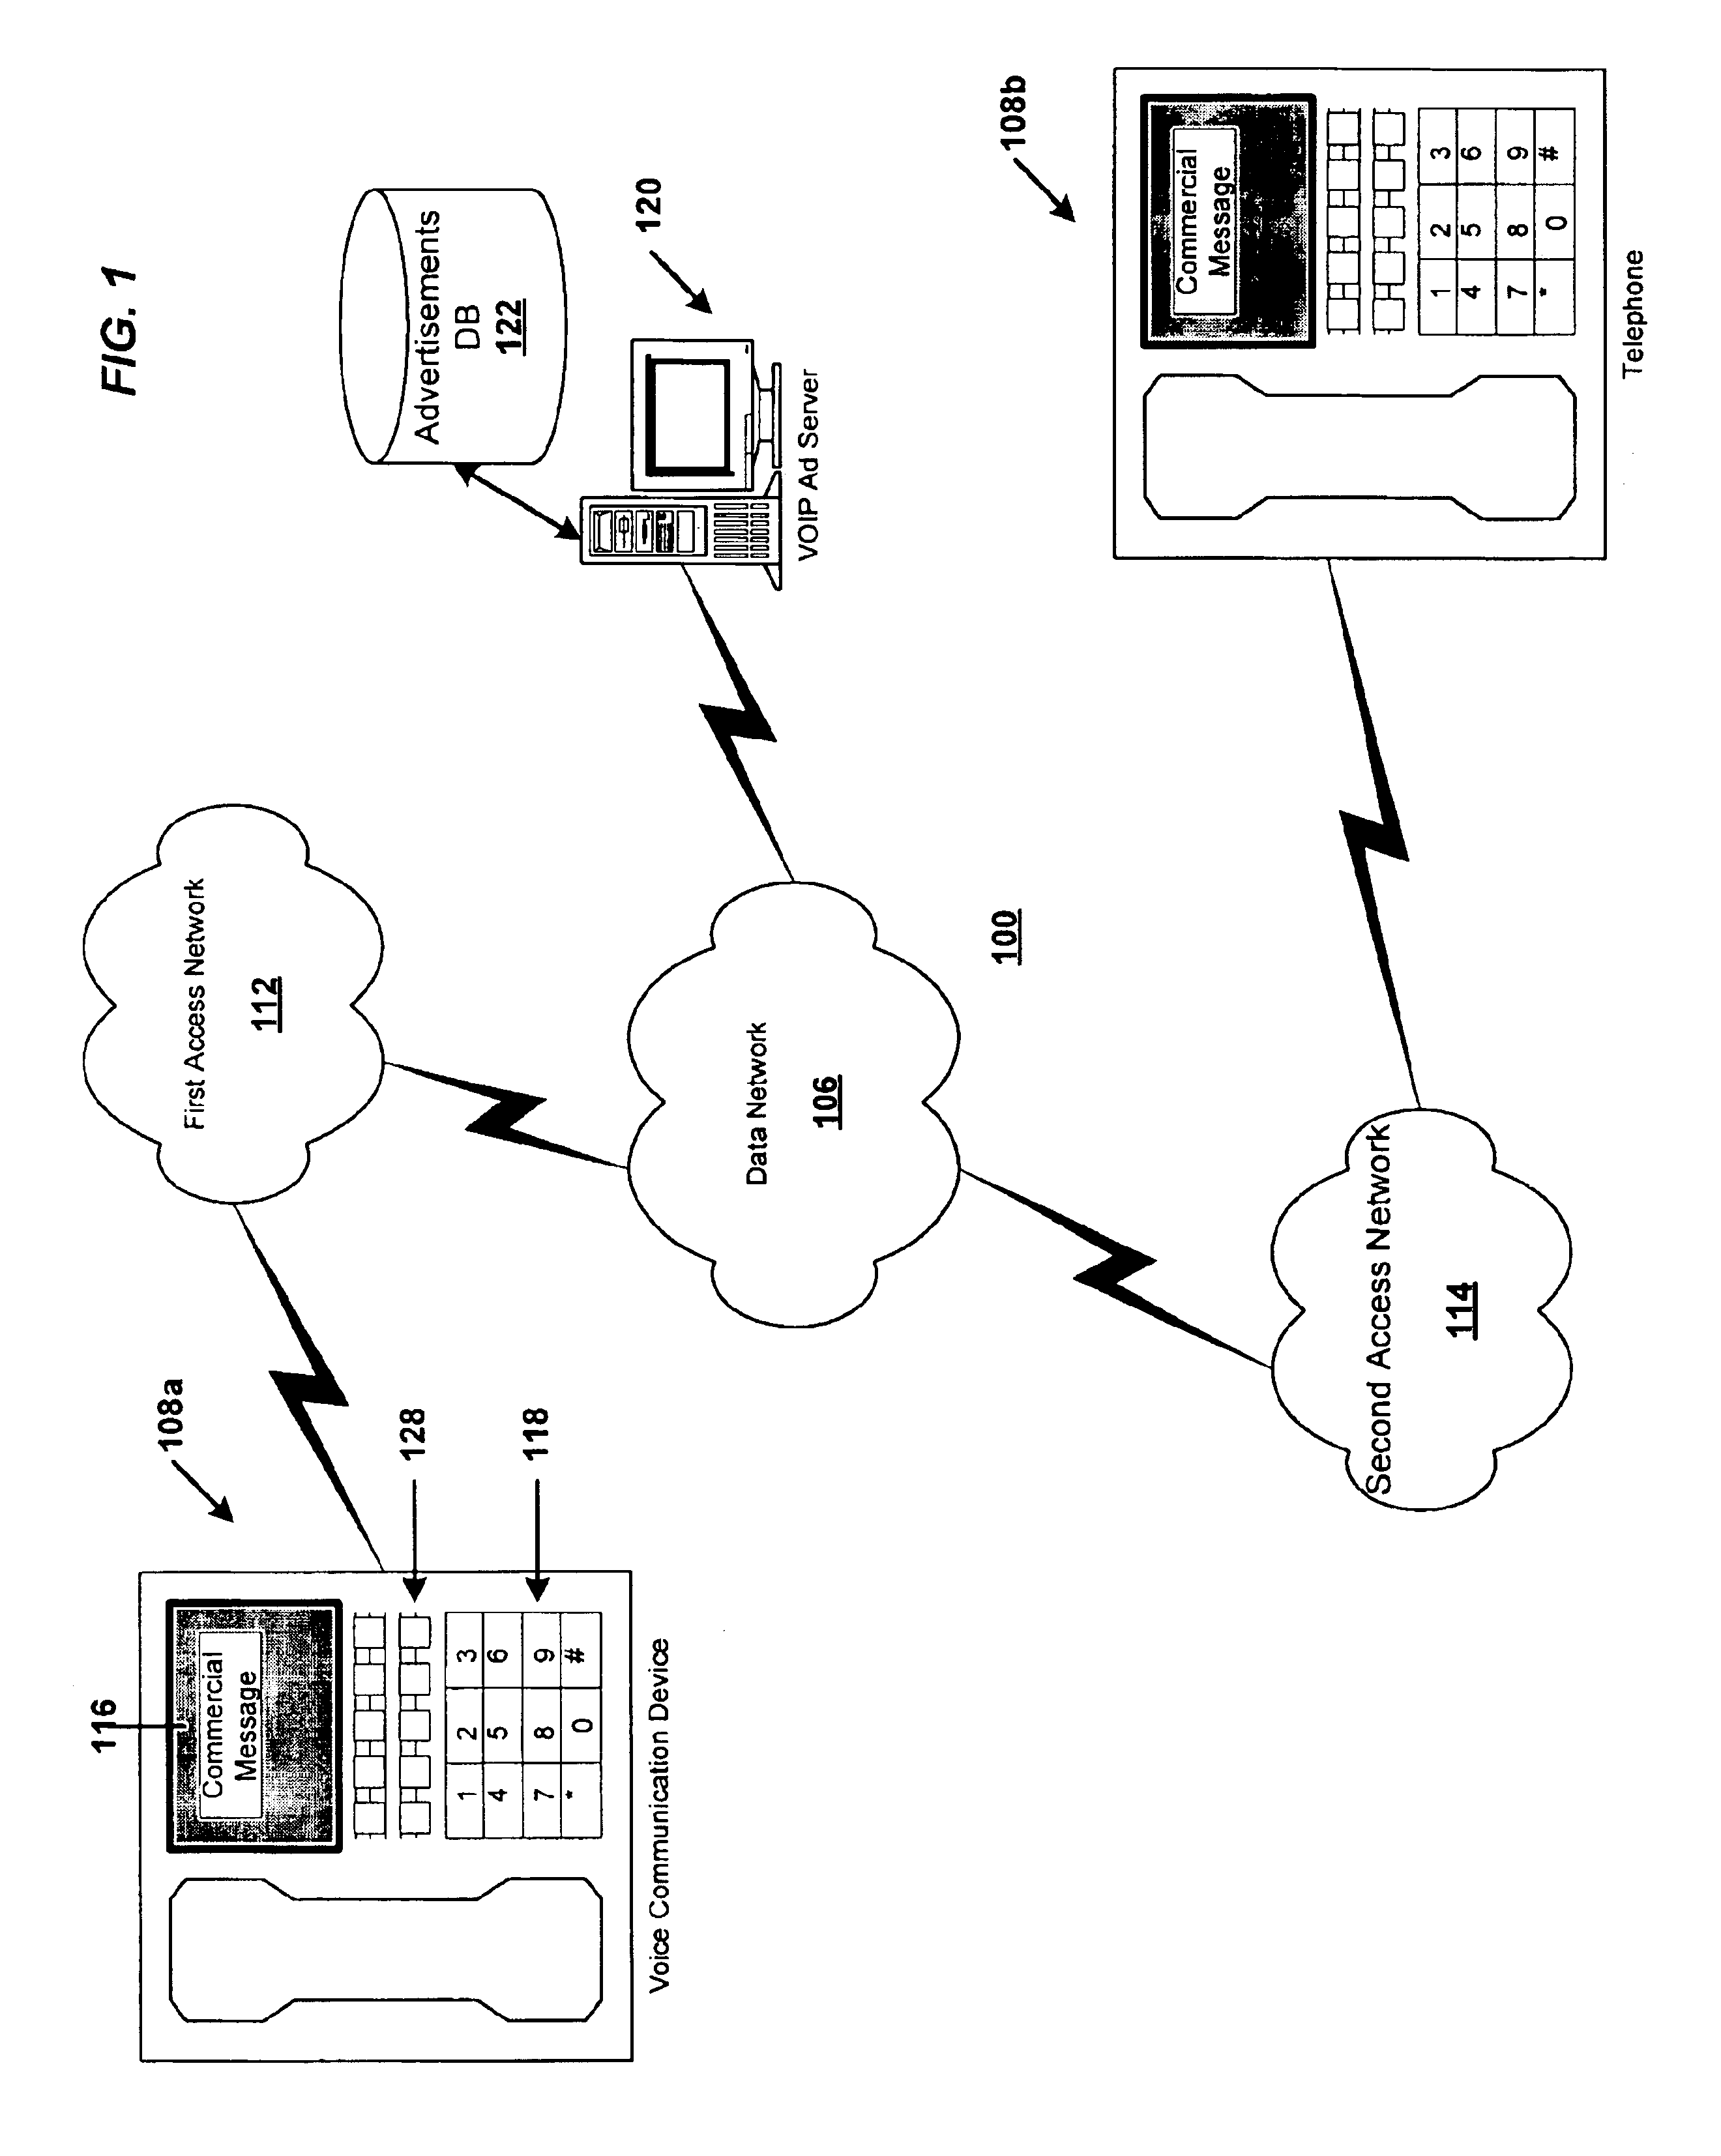 System and method for advertising using data network telephone connections